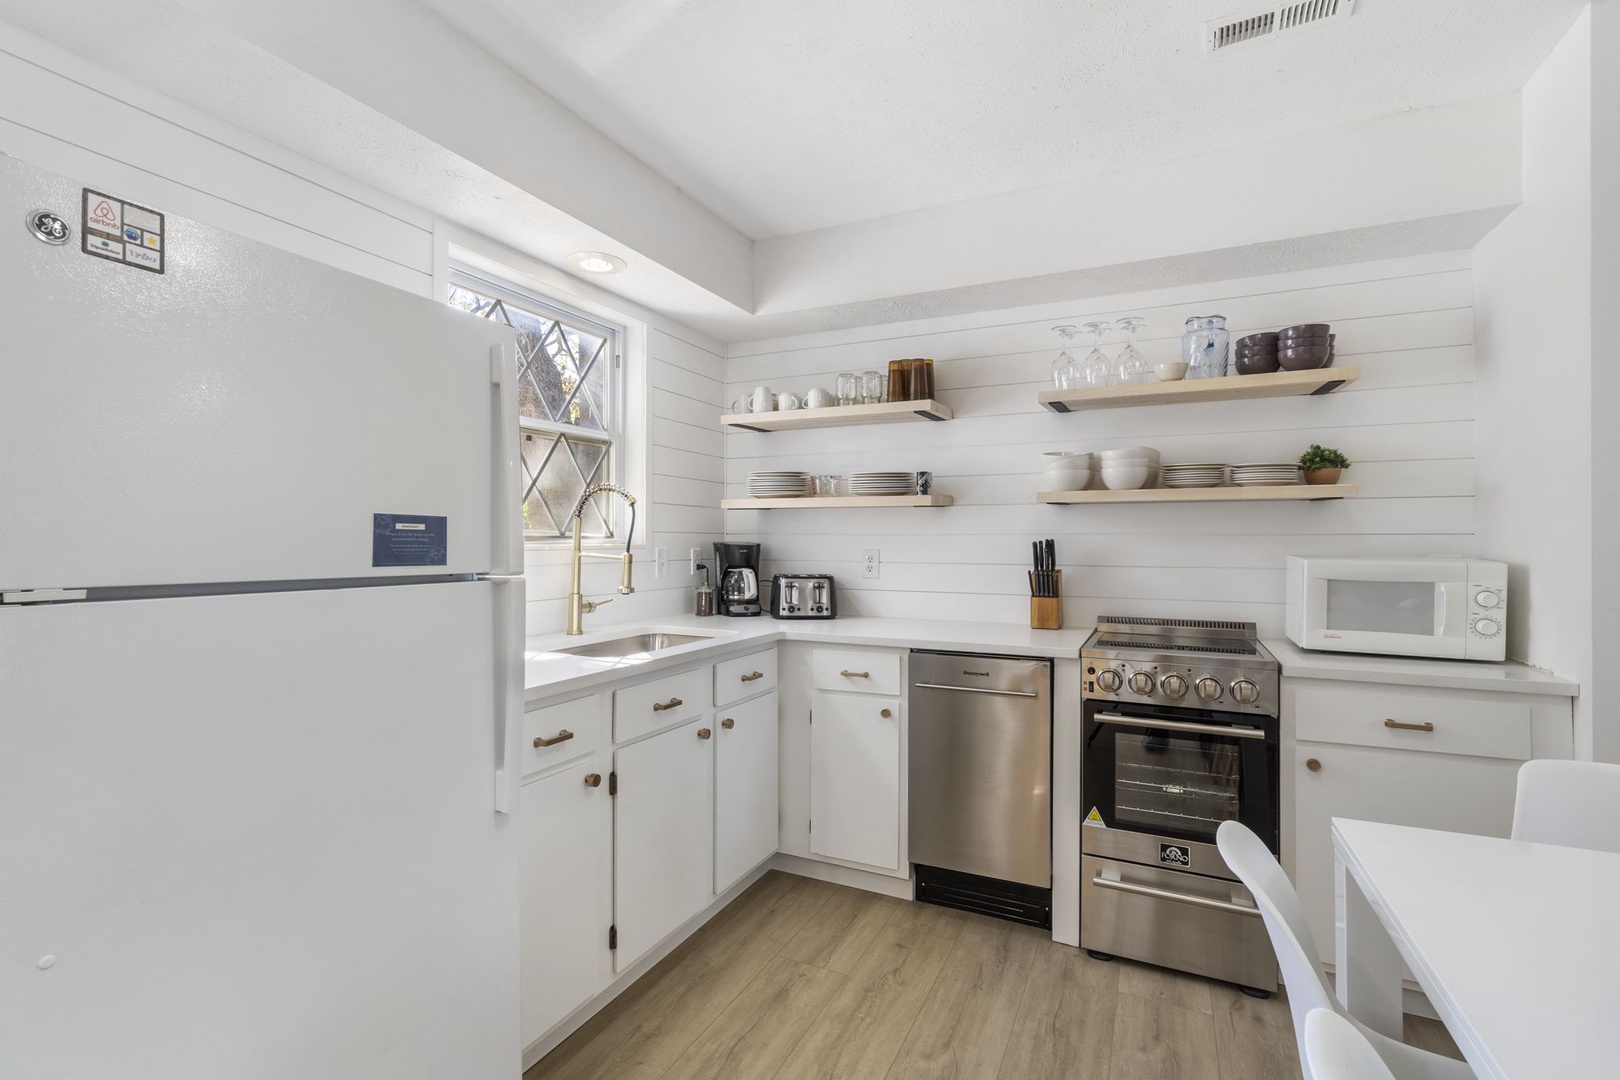 Unit 41: The bright, airy kitchen offers ample space & all the comforts of home